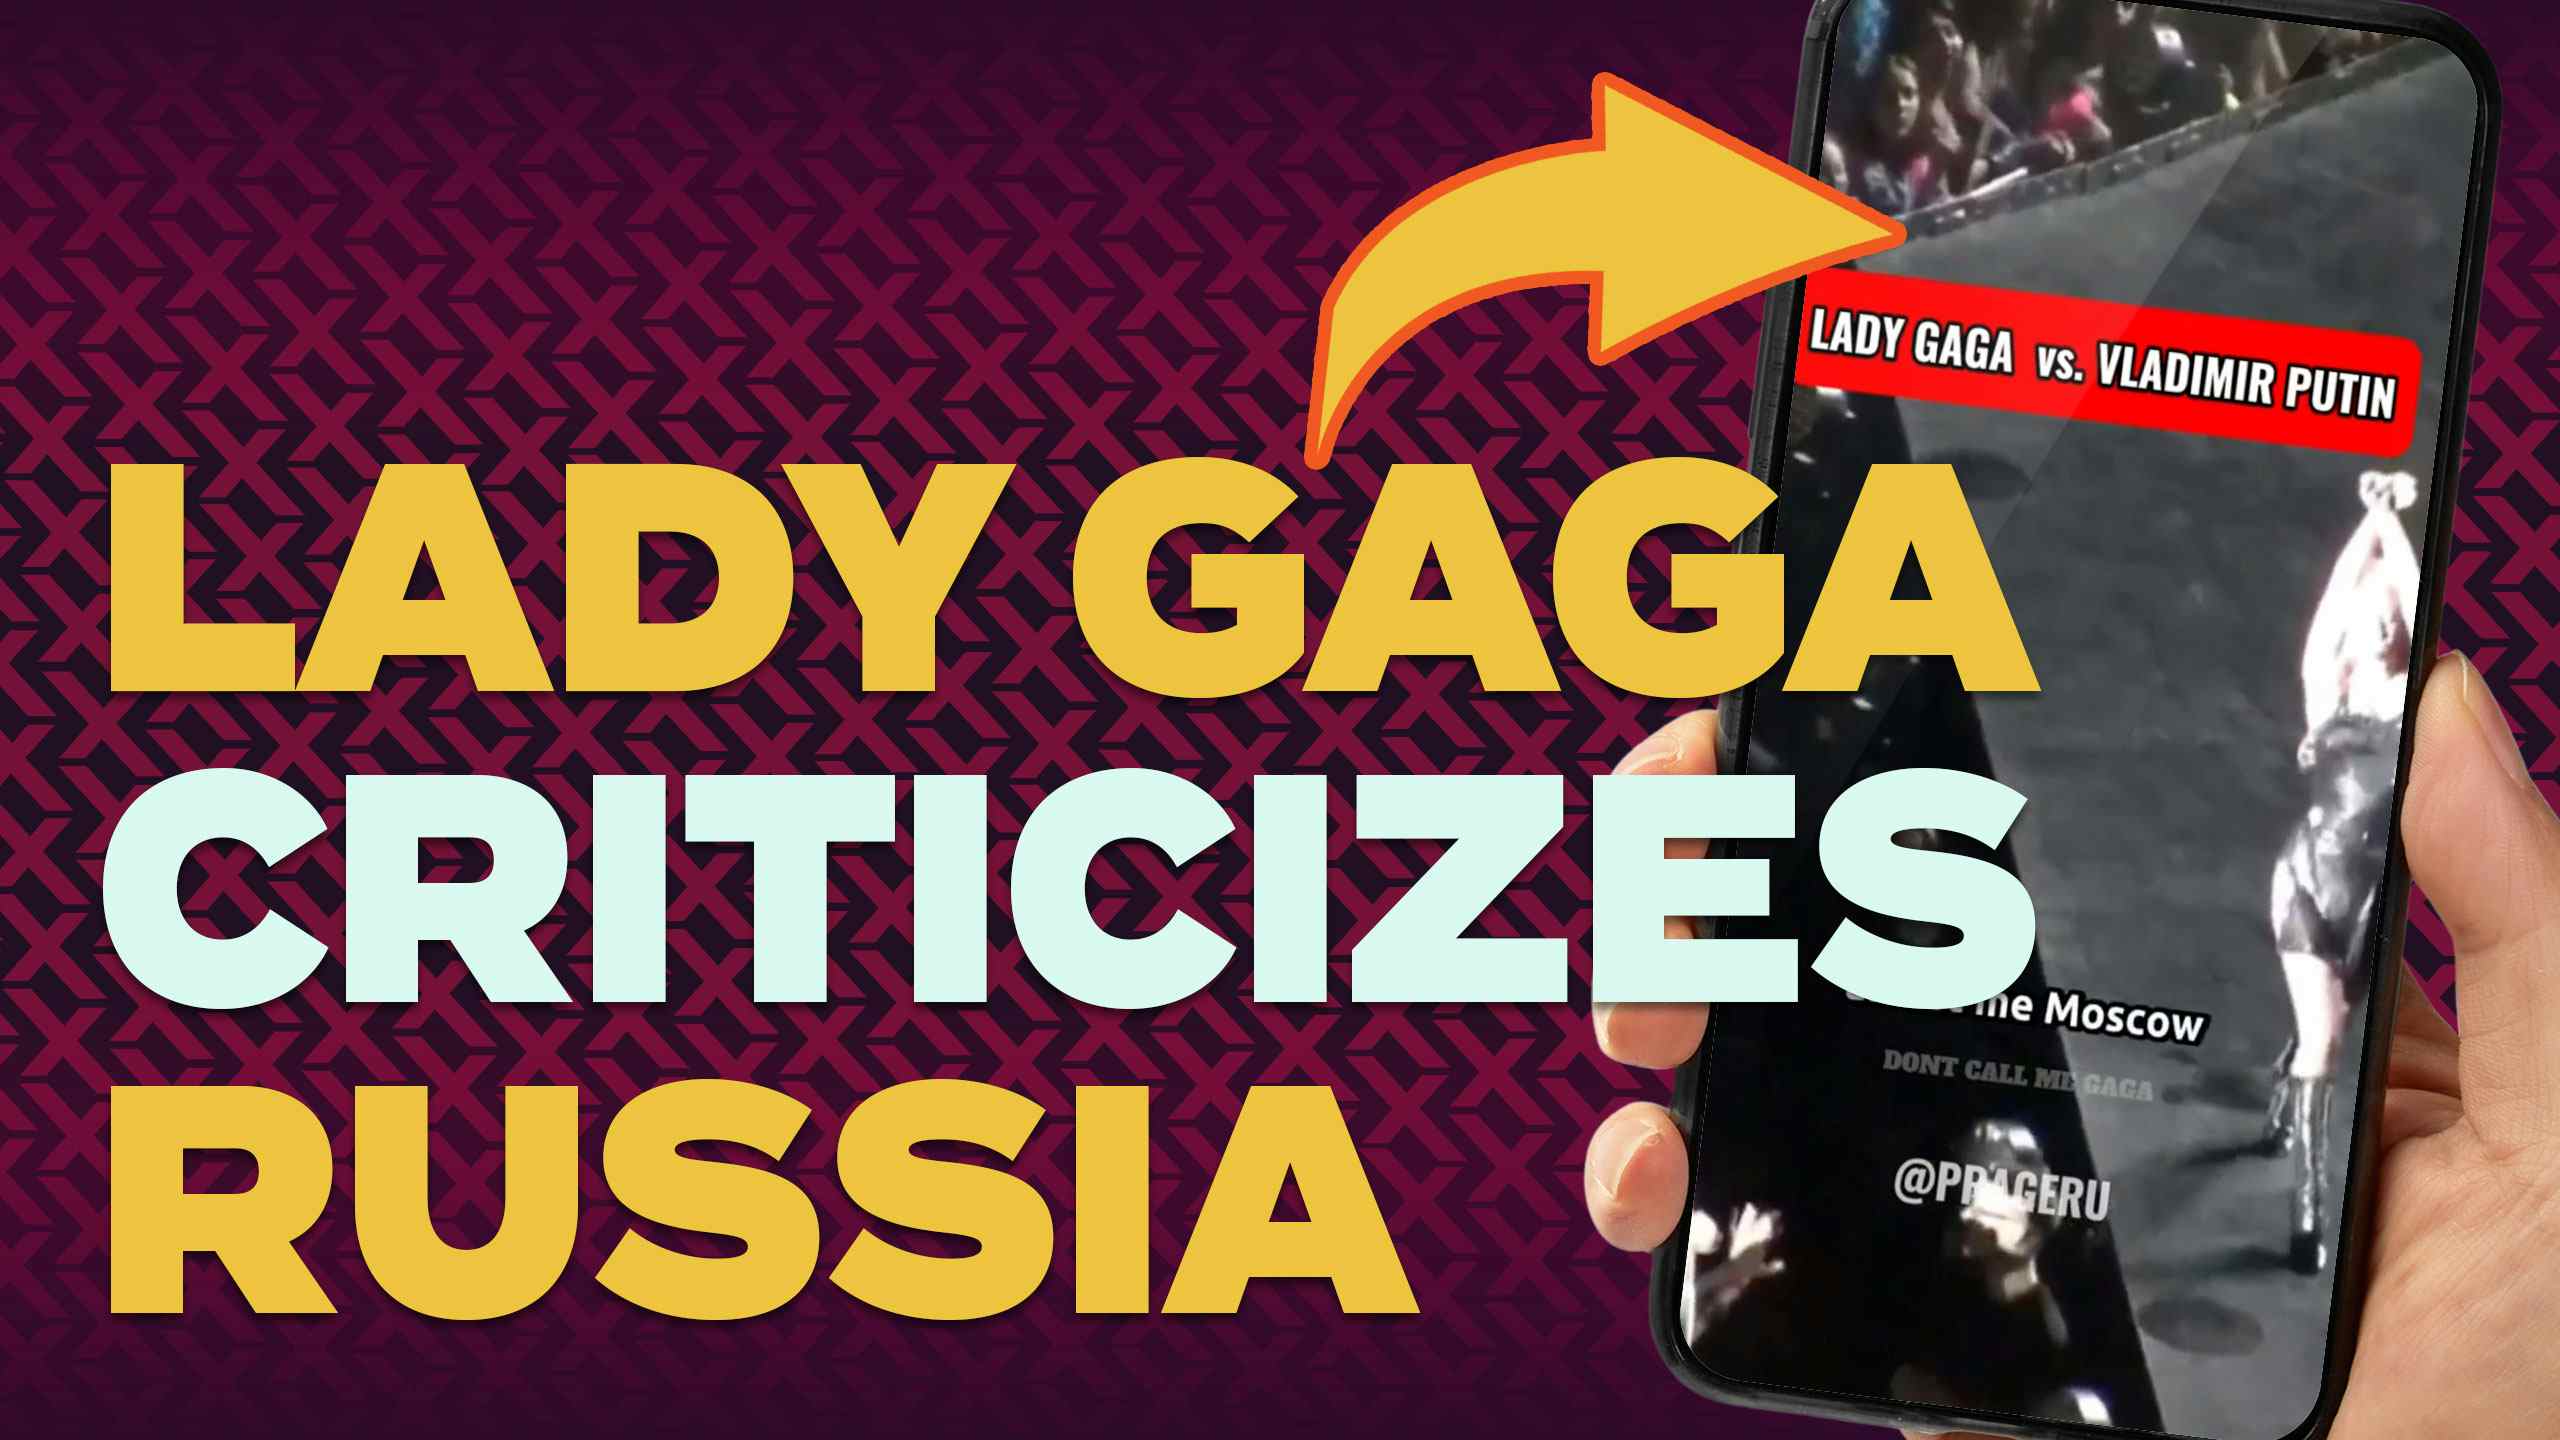 Lady Gaga Criticizes Russia on Stage